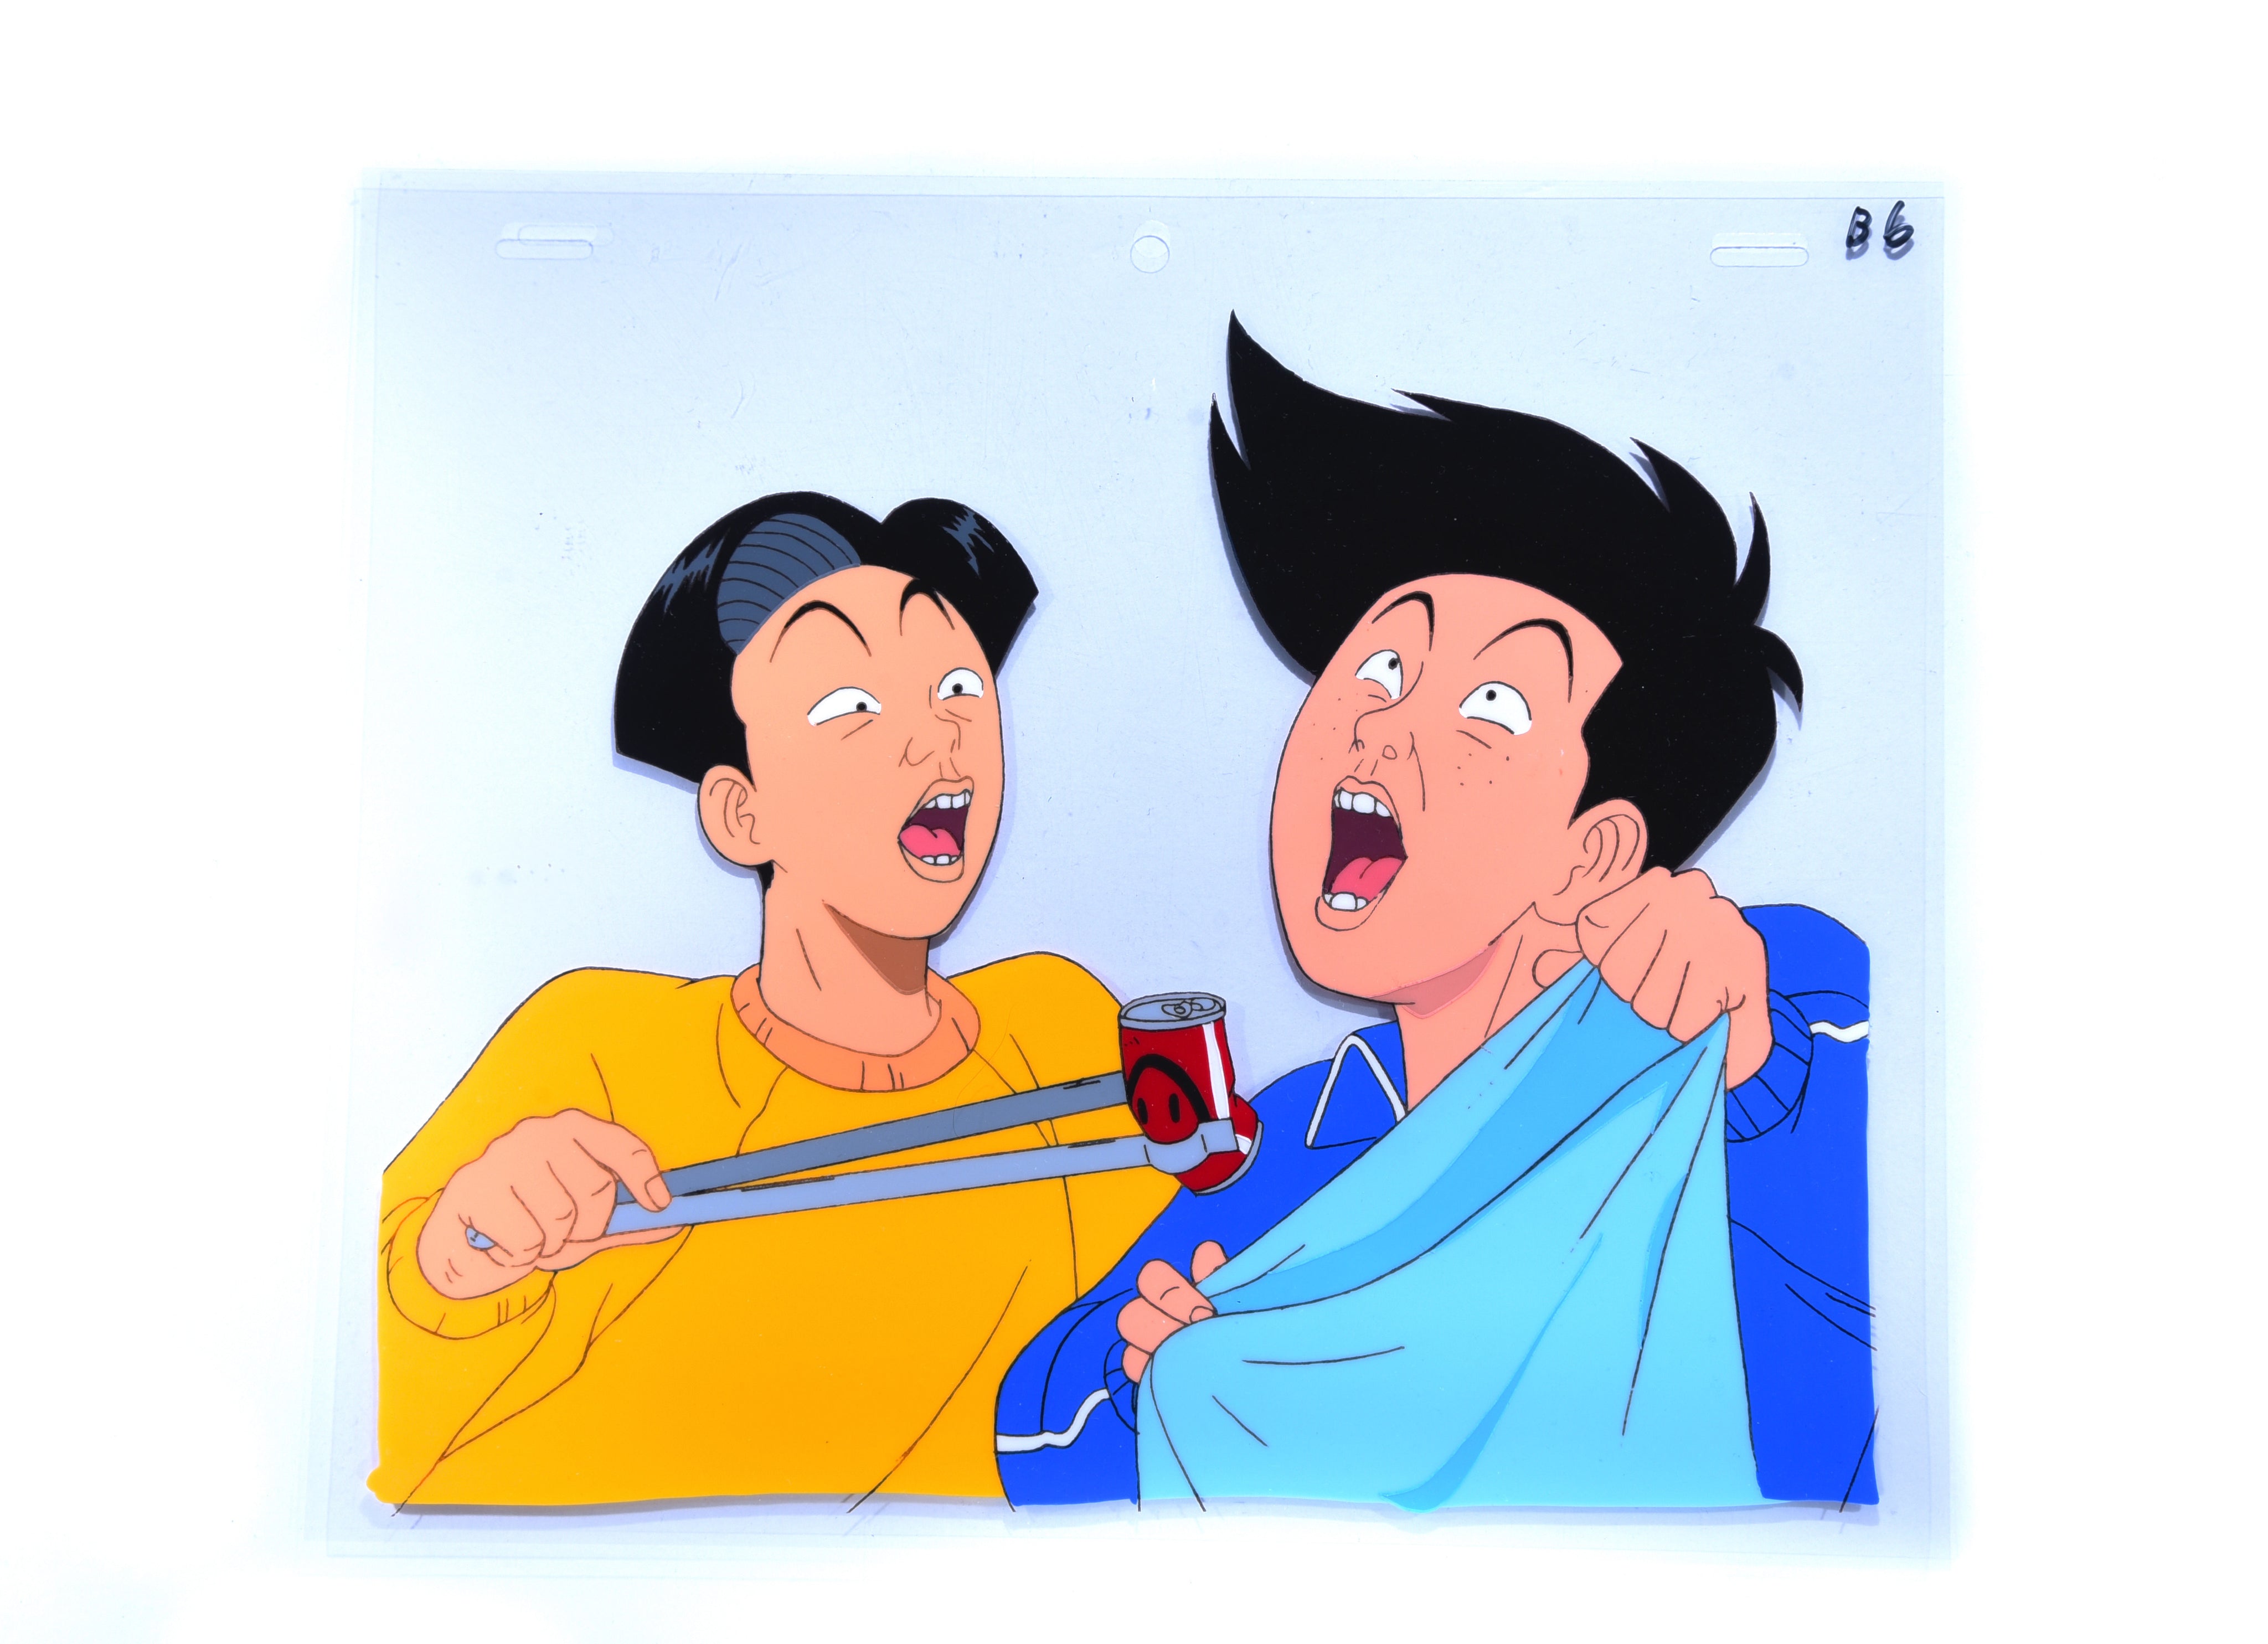 Ping Pong Club - Maeno and Izawa cel - Timeless Cel Gallery